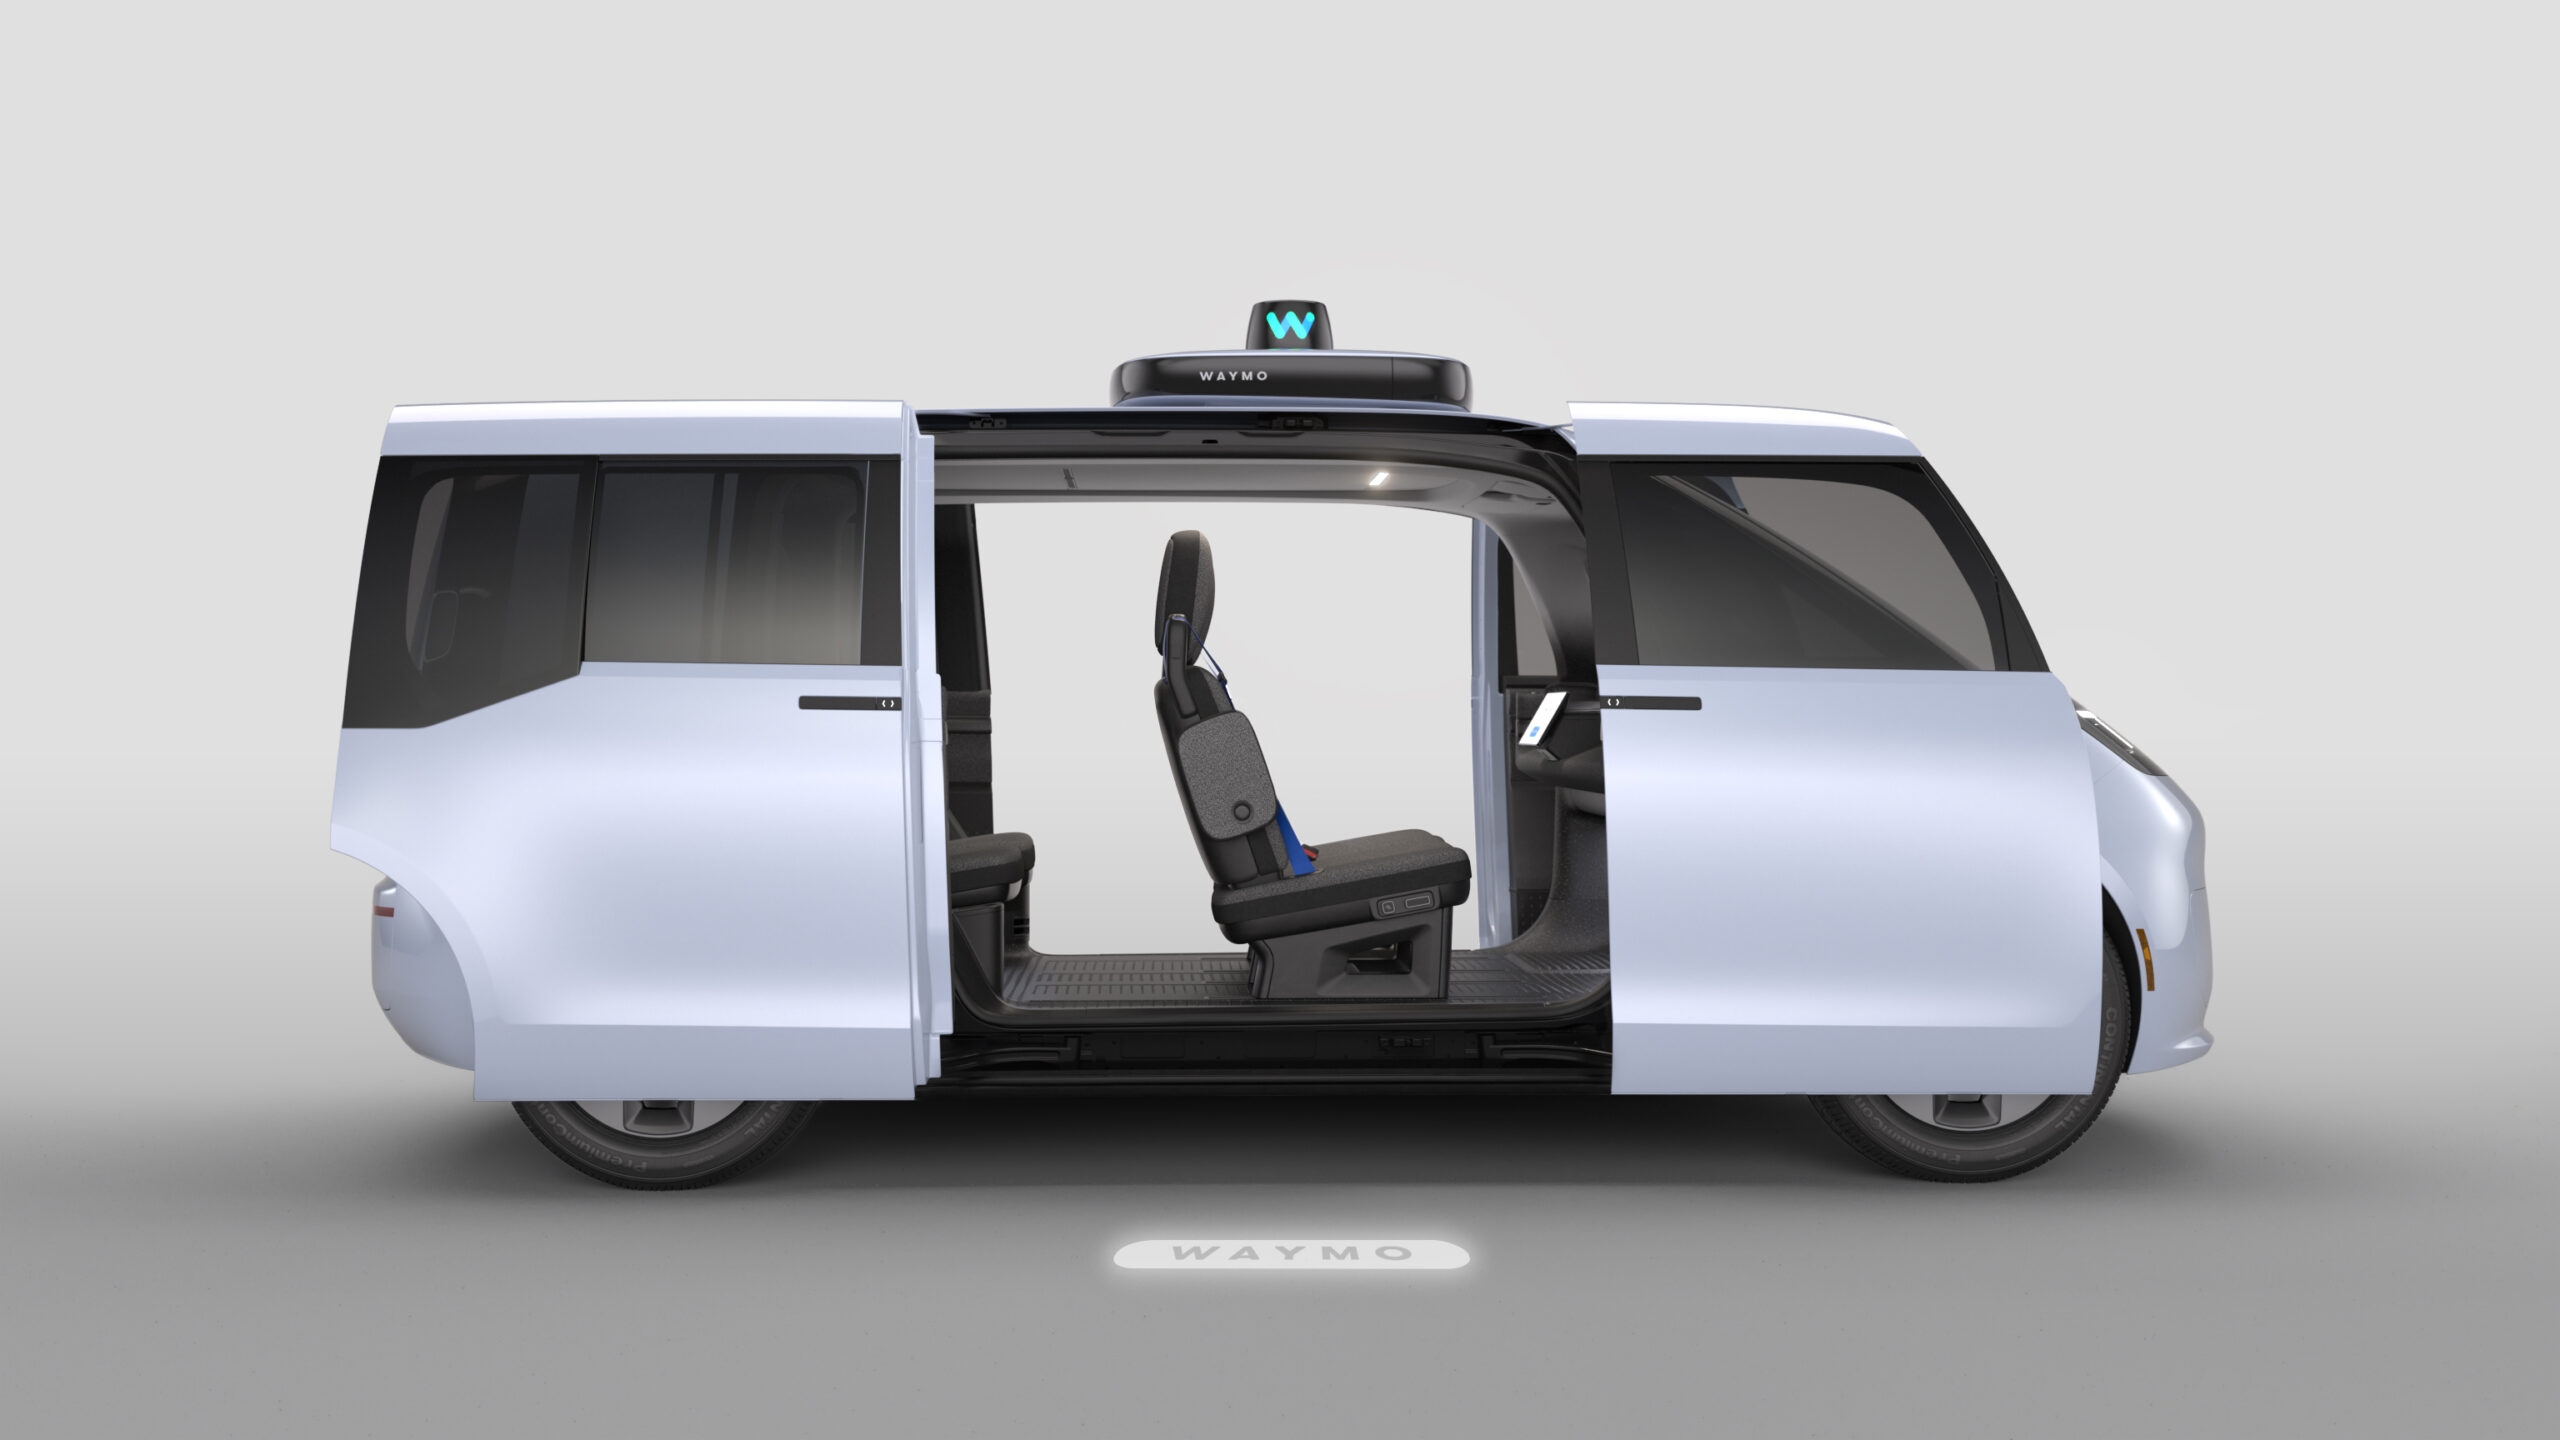 Check out Waymo’s new electric, self-driving taxi design